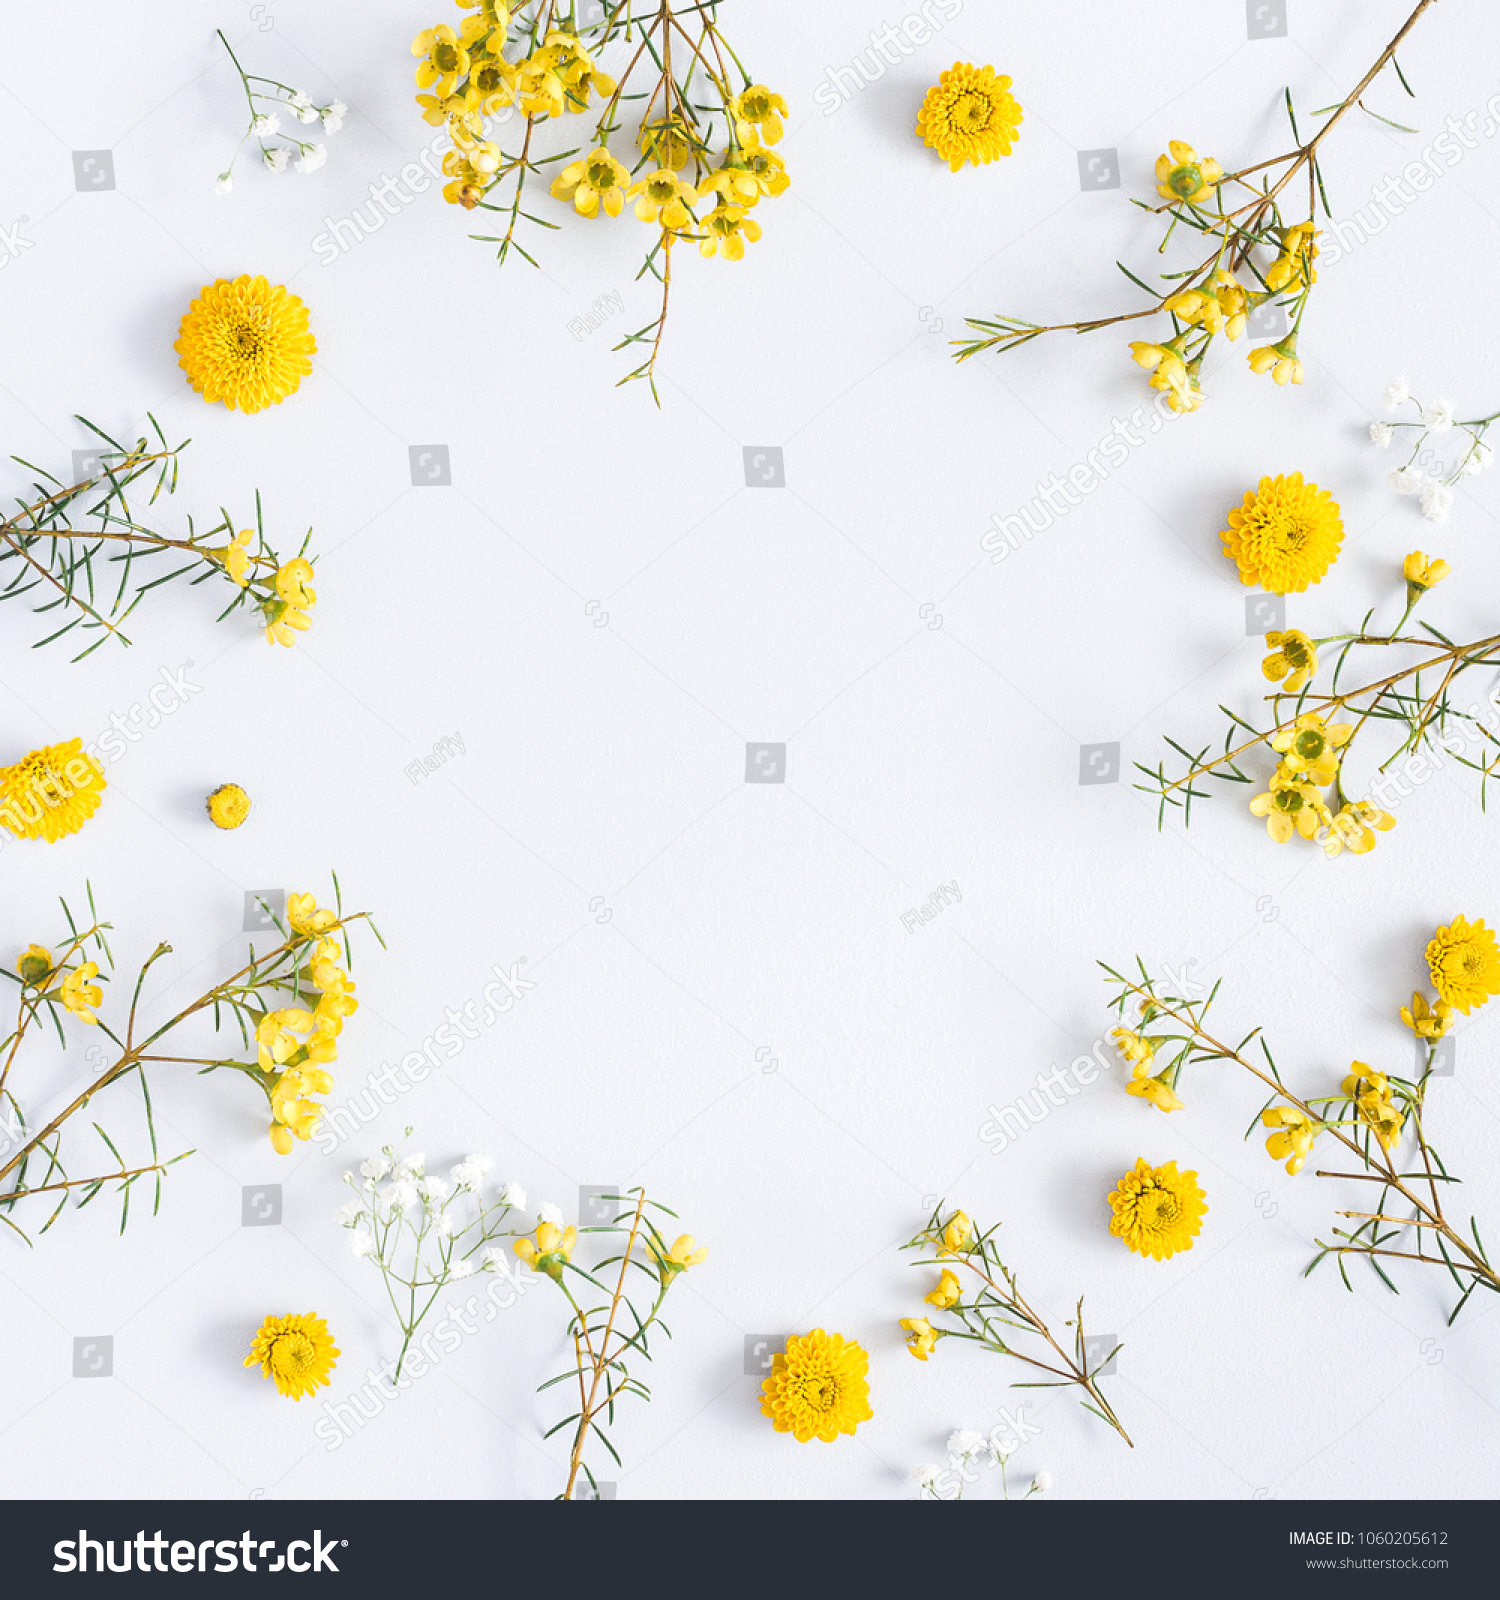 Flowers composition. Frame made of yellow flowers on gray background. Flat lay, top view, square, copy space #1060205612